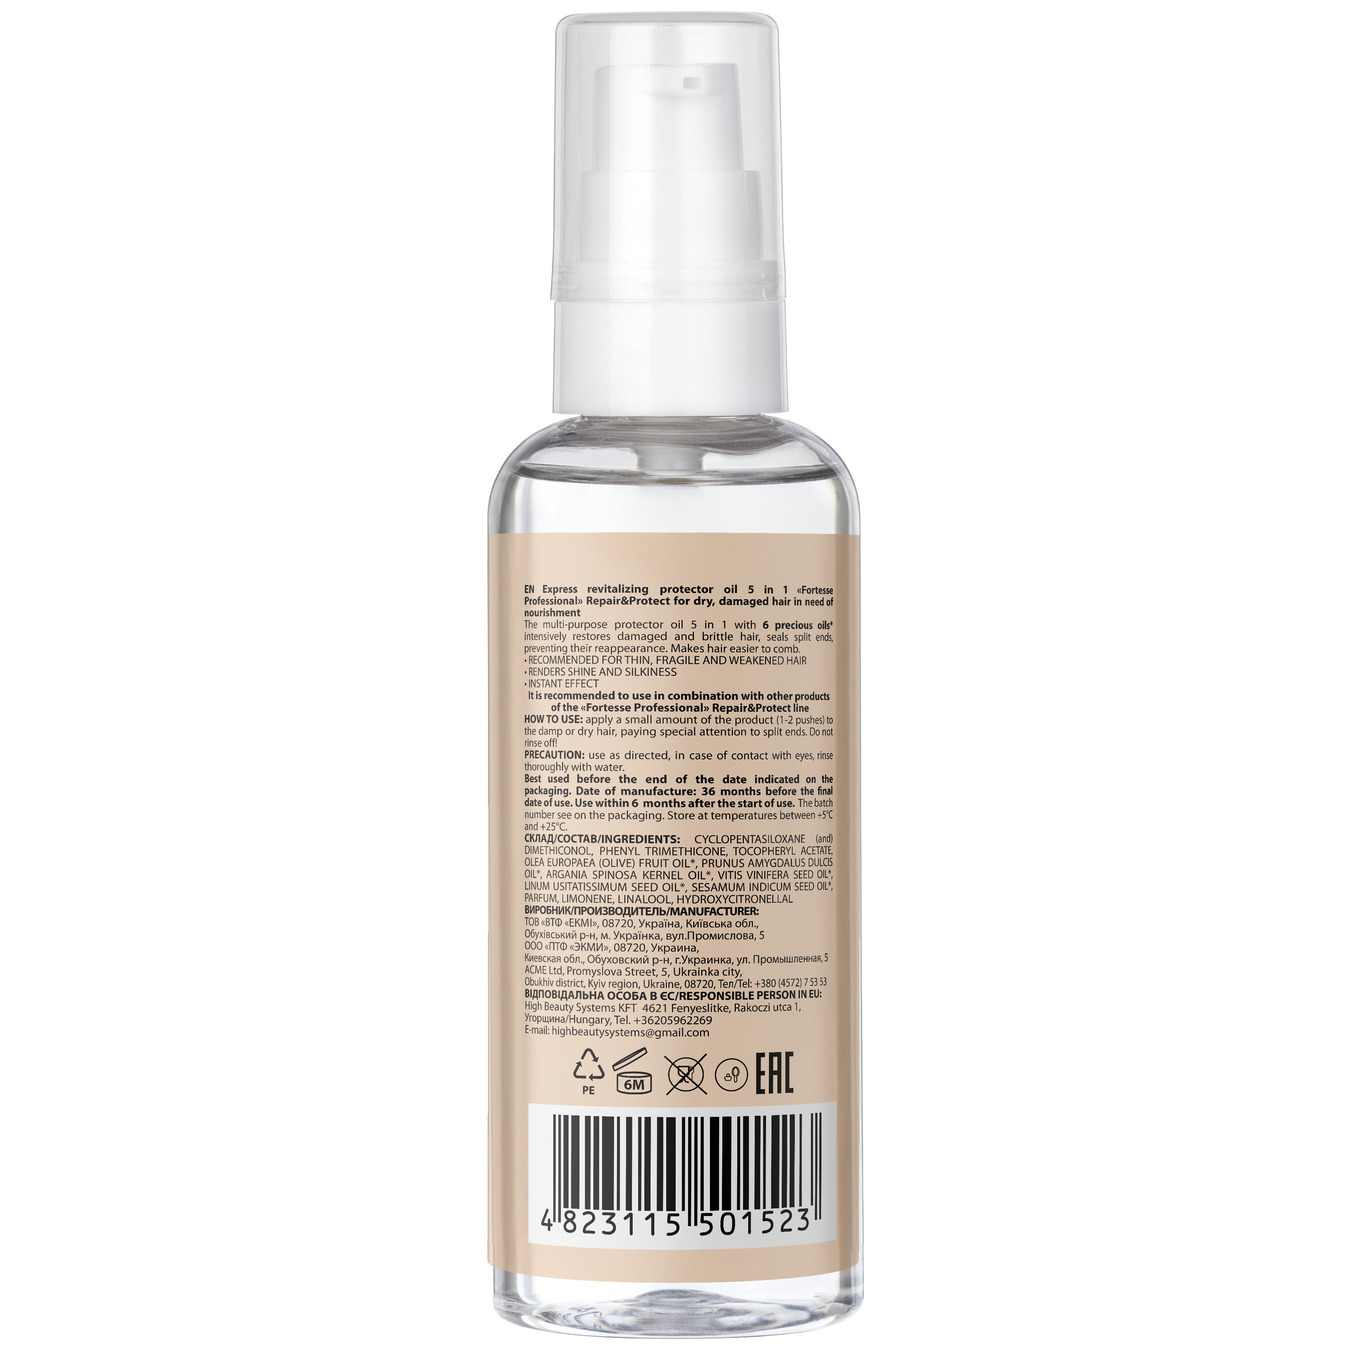 Oil-protector FORTESSE PRO 5 in 1 express restorative for dry damaged hair in need of nourishment repair&protect 60ml 2